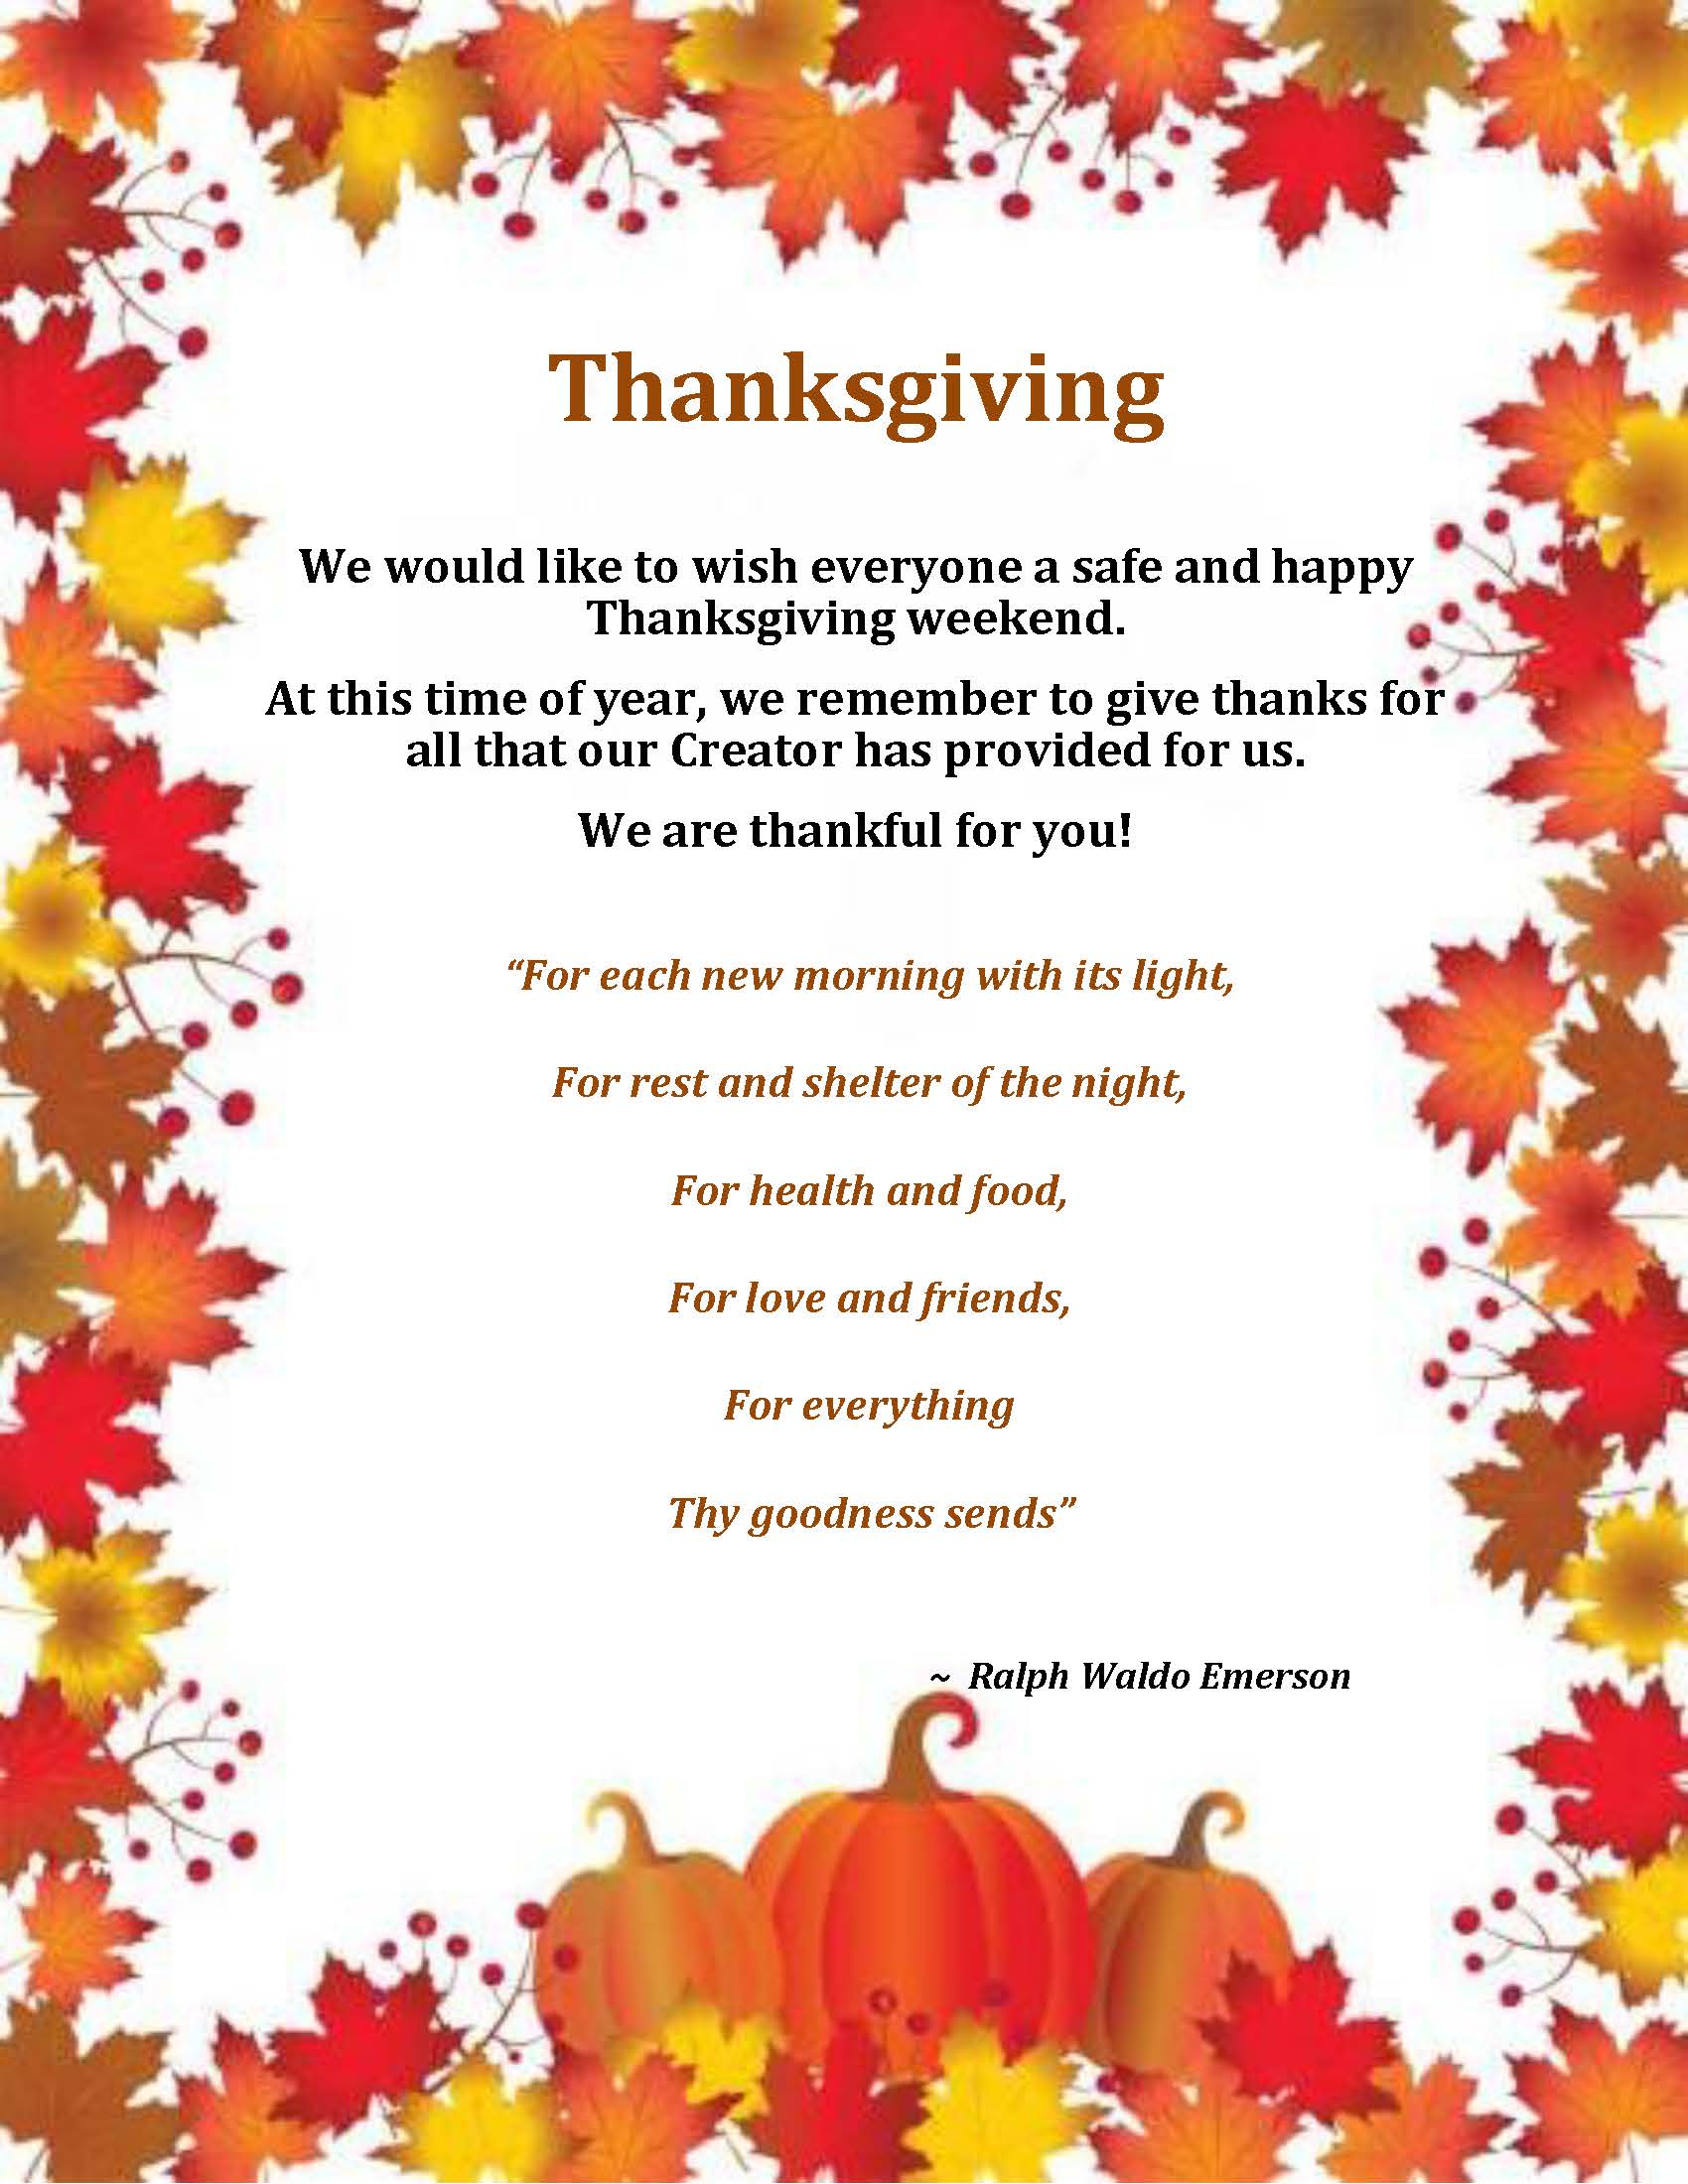 We Would Like to Wish Everyone a Safe and Happy Thanksgiving Weekend